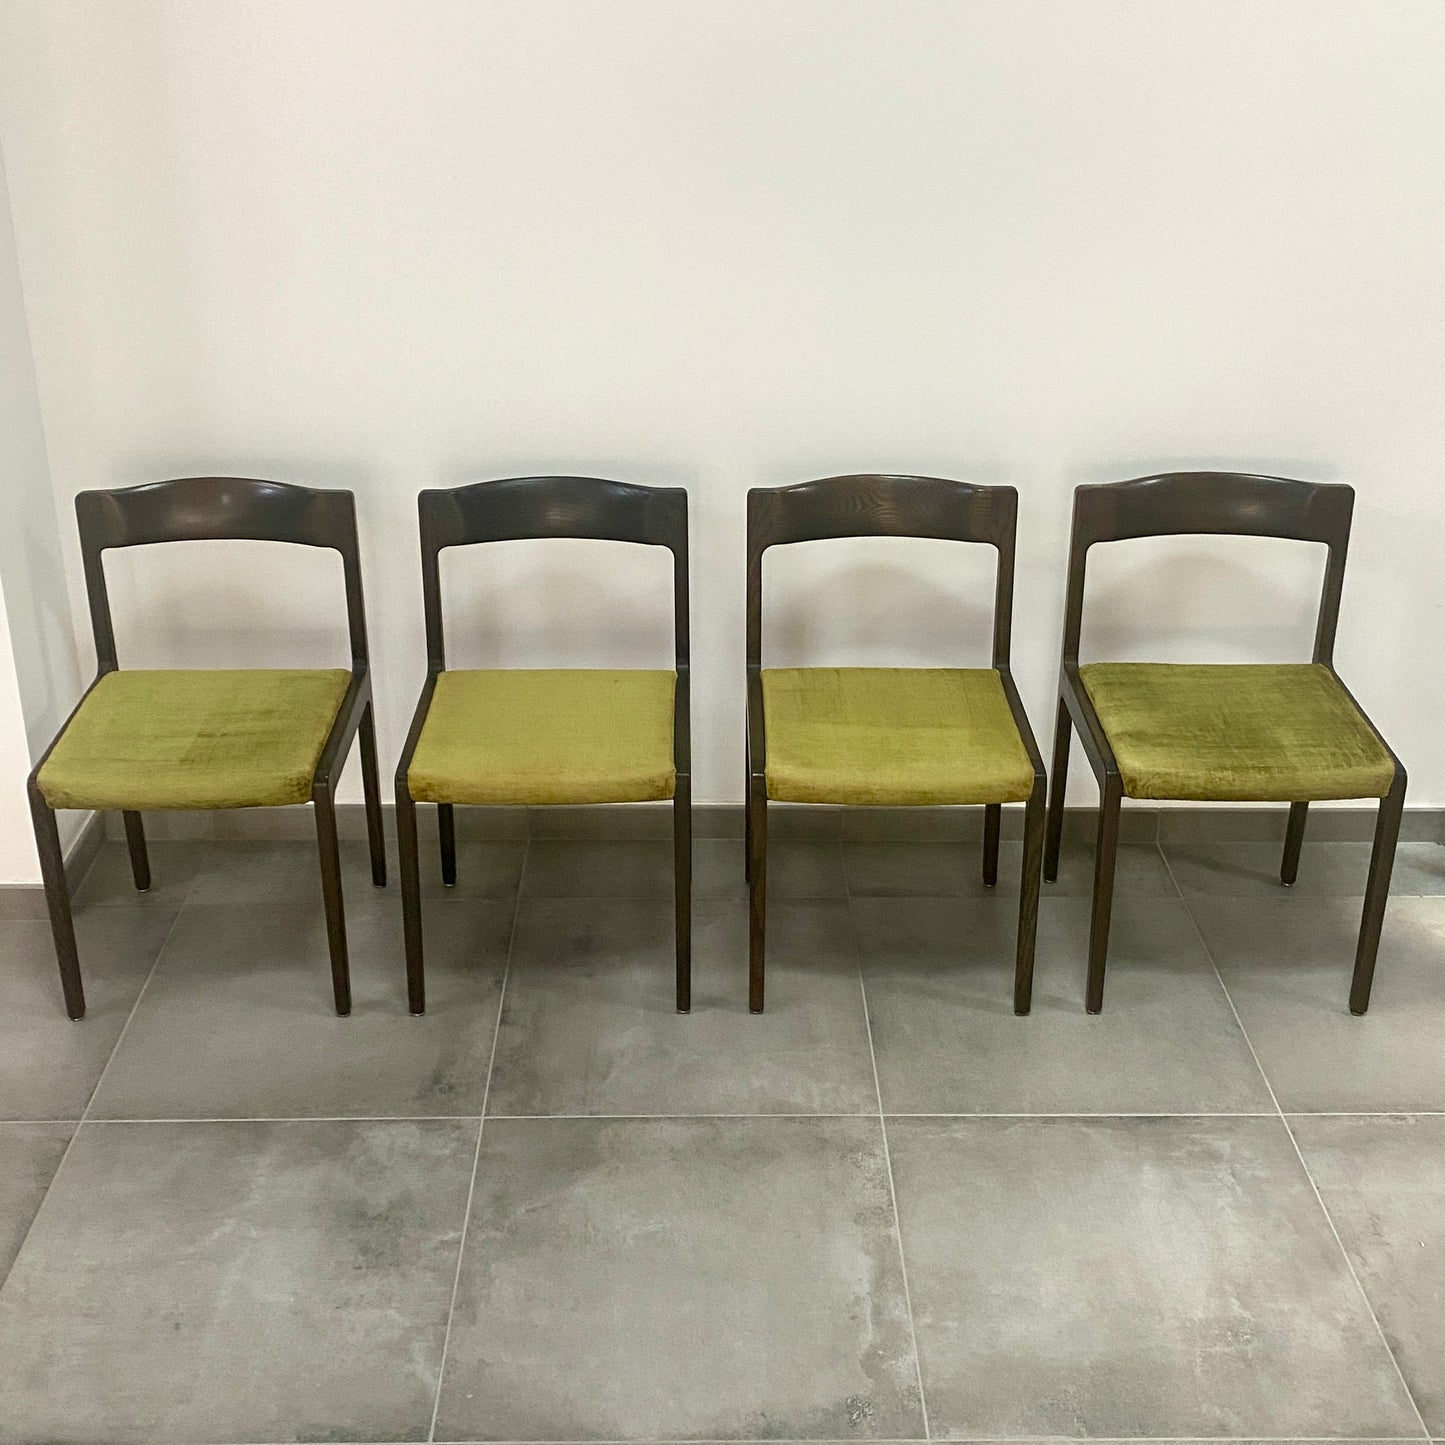 4 chaises scandinaves vintage